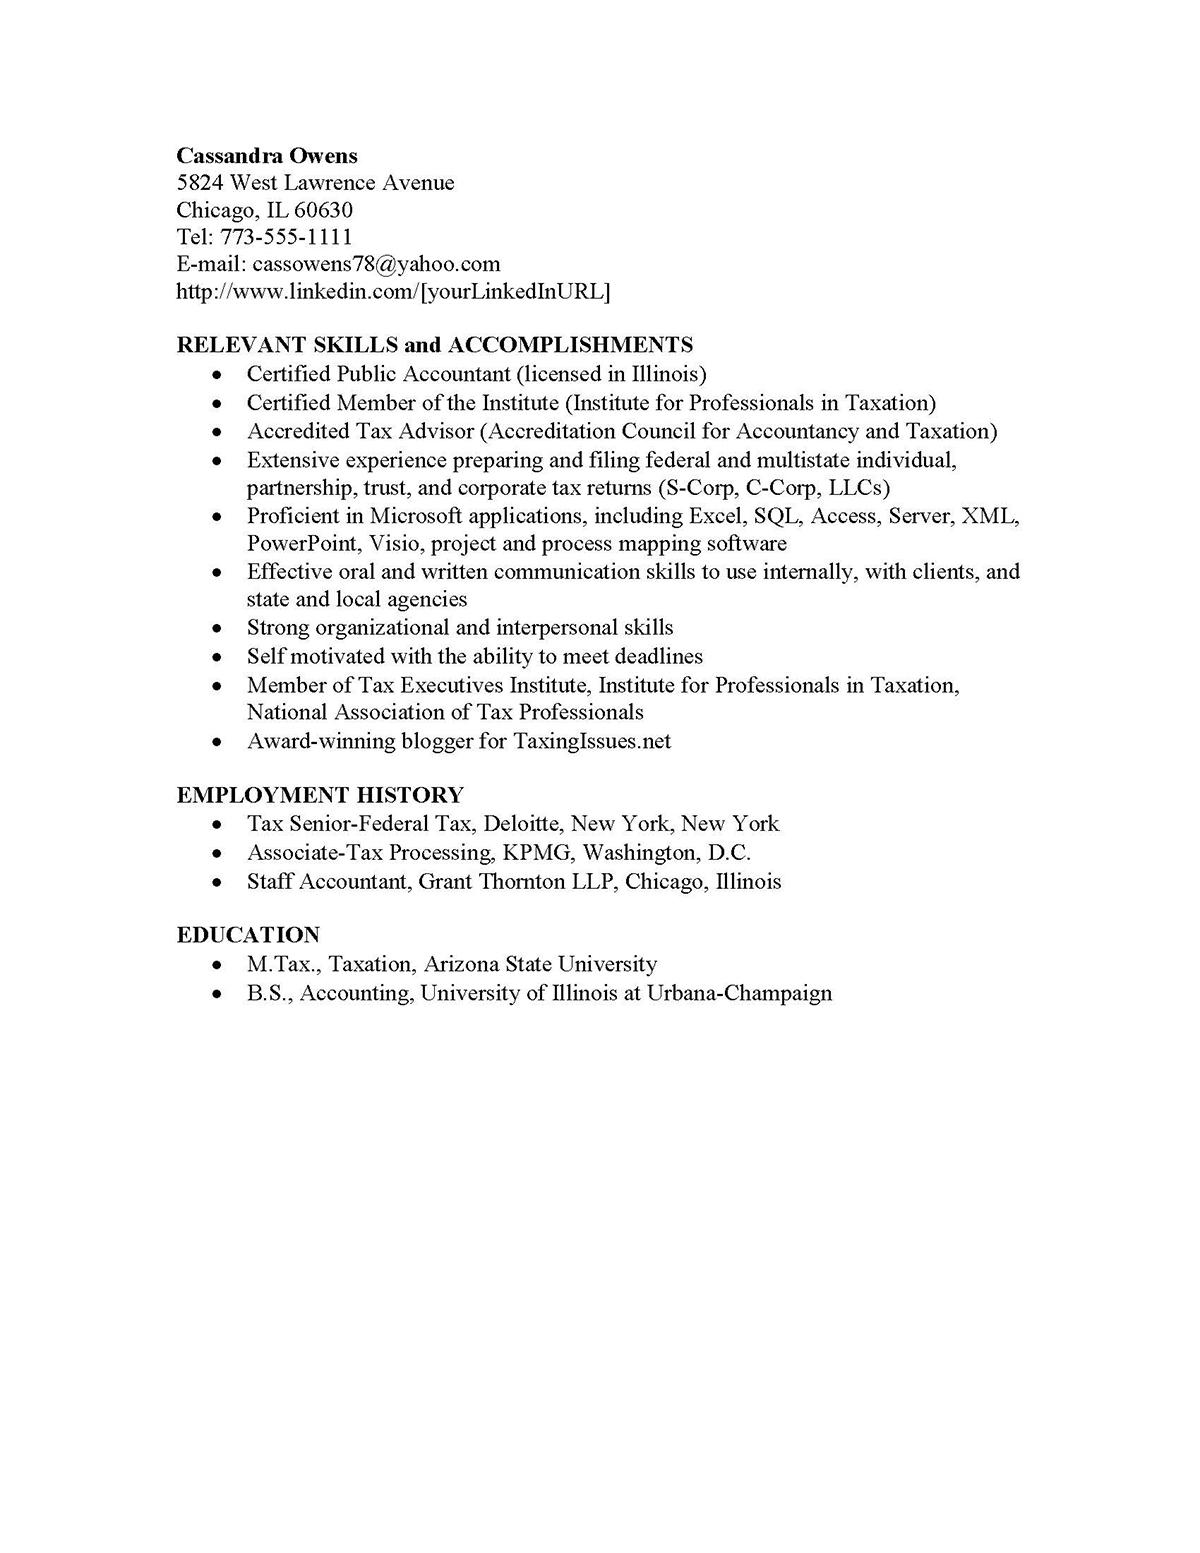 Sample resume: Accounting, Mid Experience, Functional